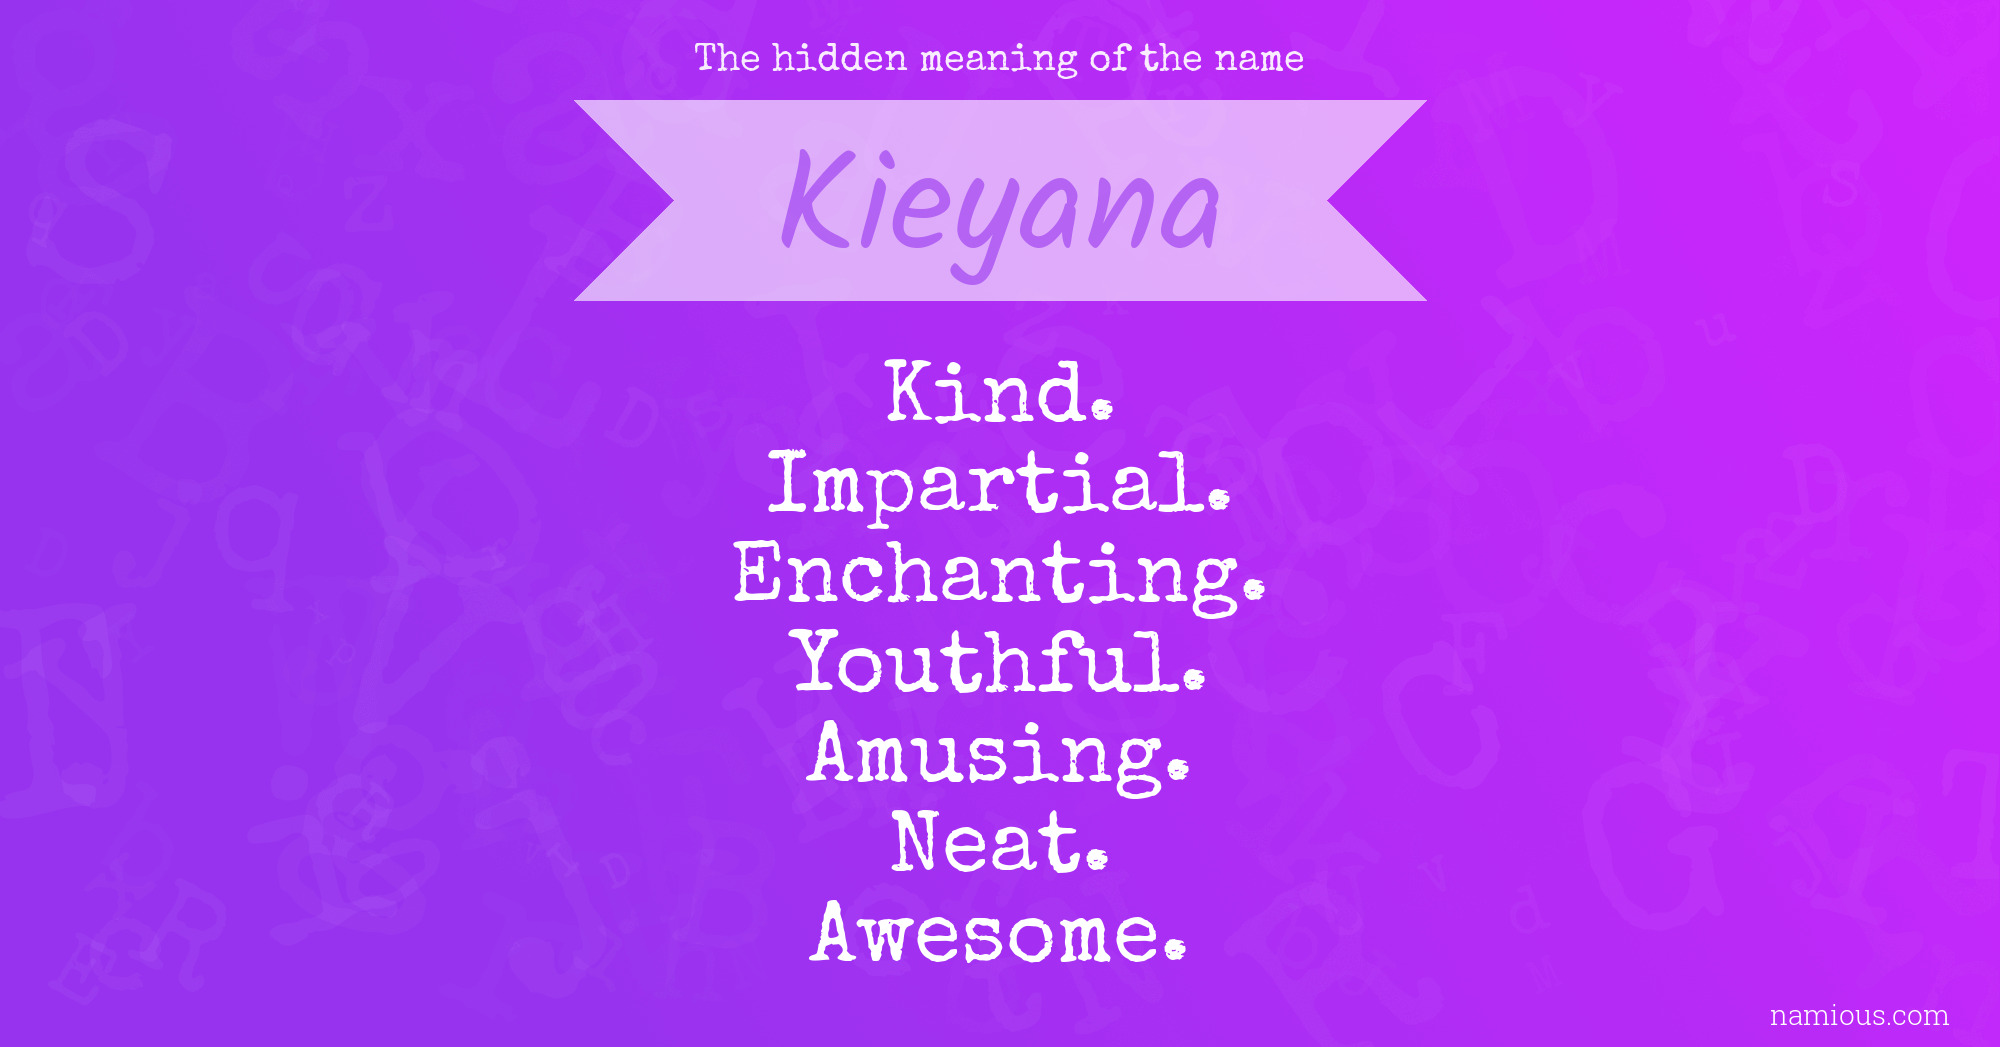 The hidden meaning of the name Kieyana